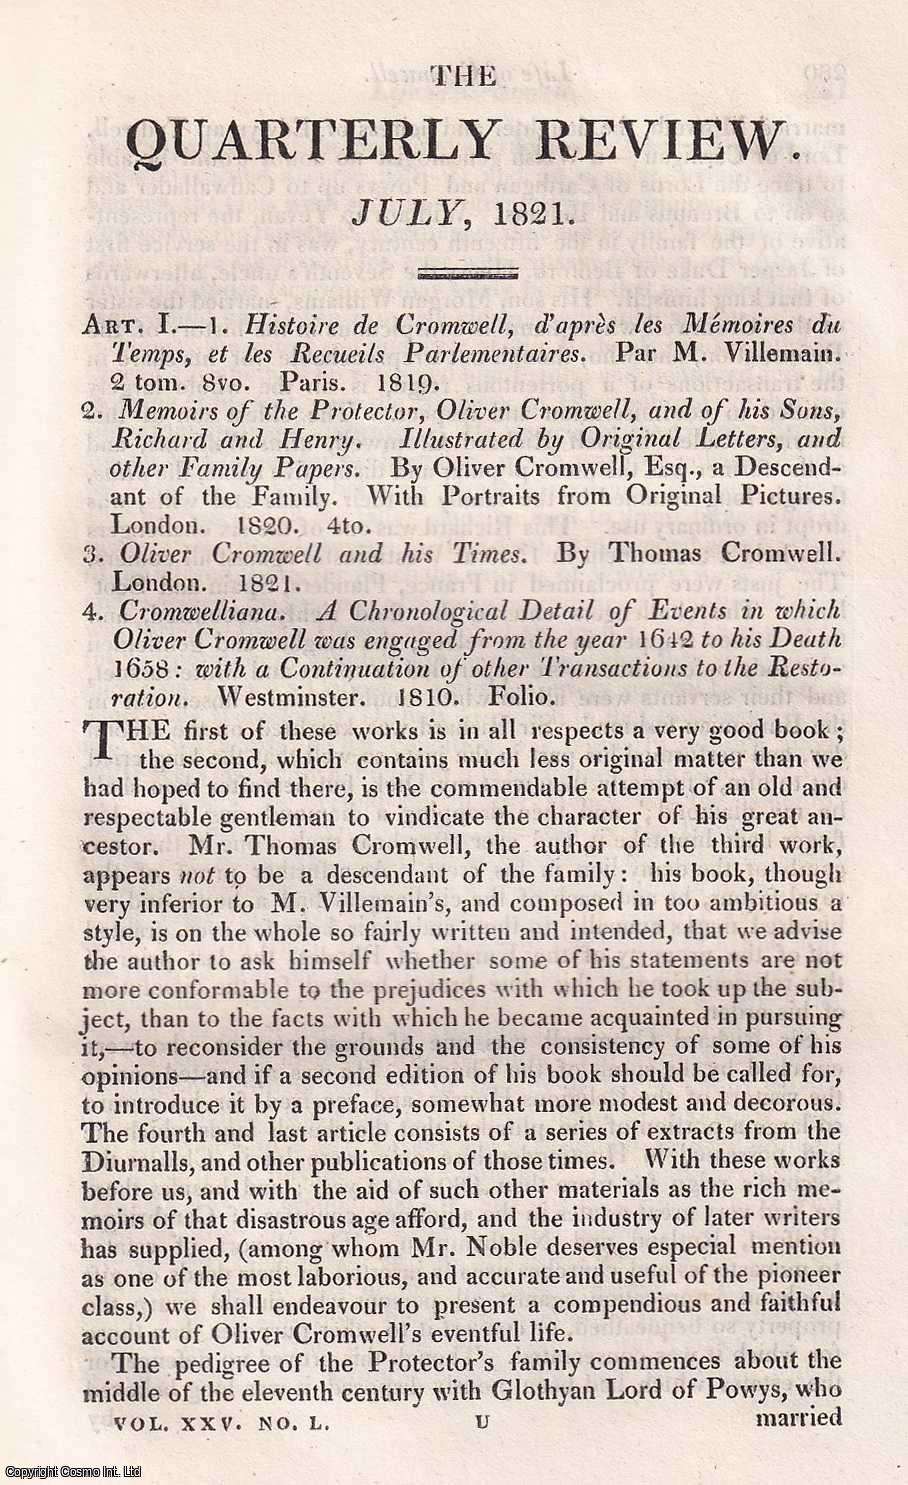 Robert Southey - Life of Oliver Cromwell, Lord Protector. A summary from various sources. An uncommon original article from The Quarterly Review, 1821.